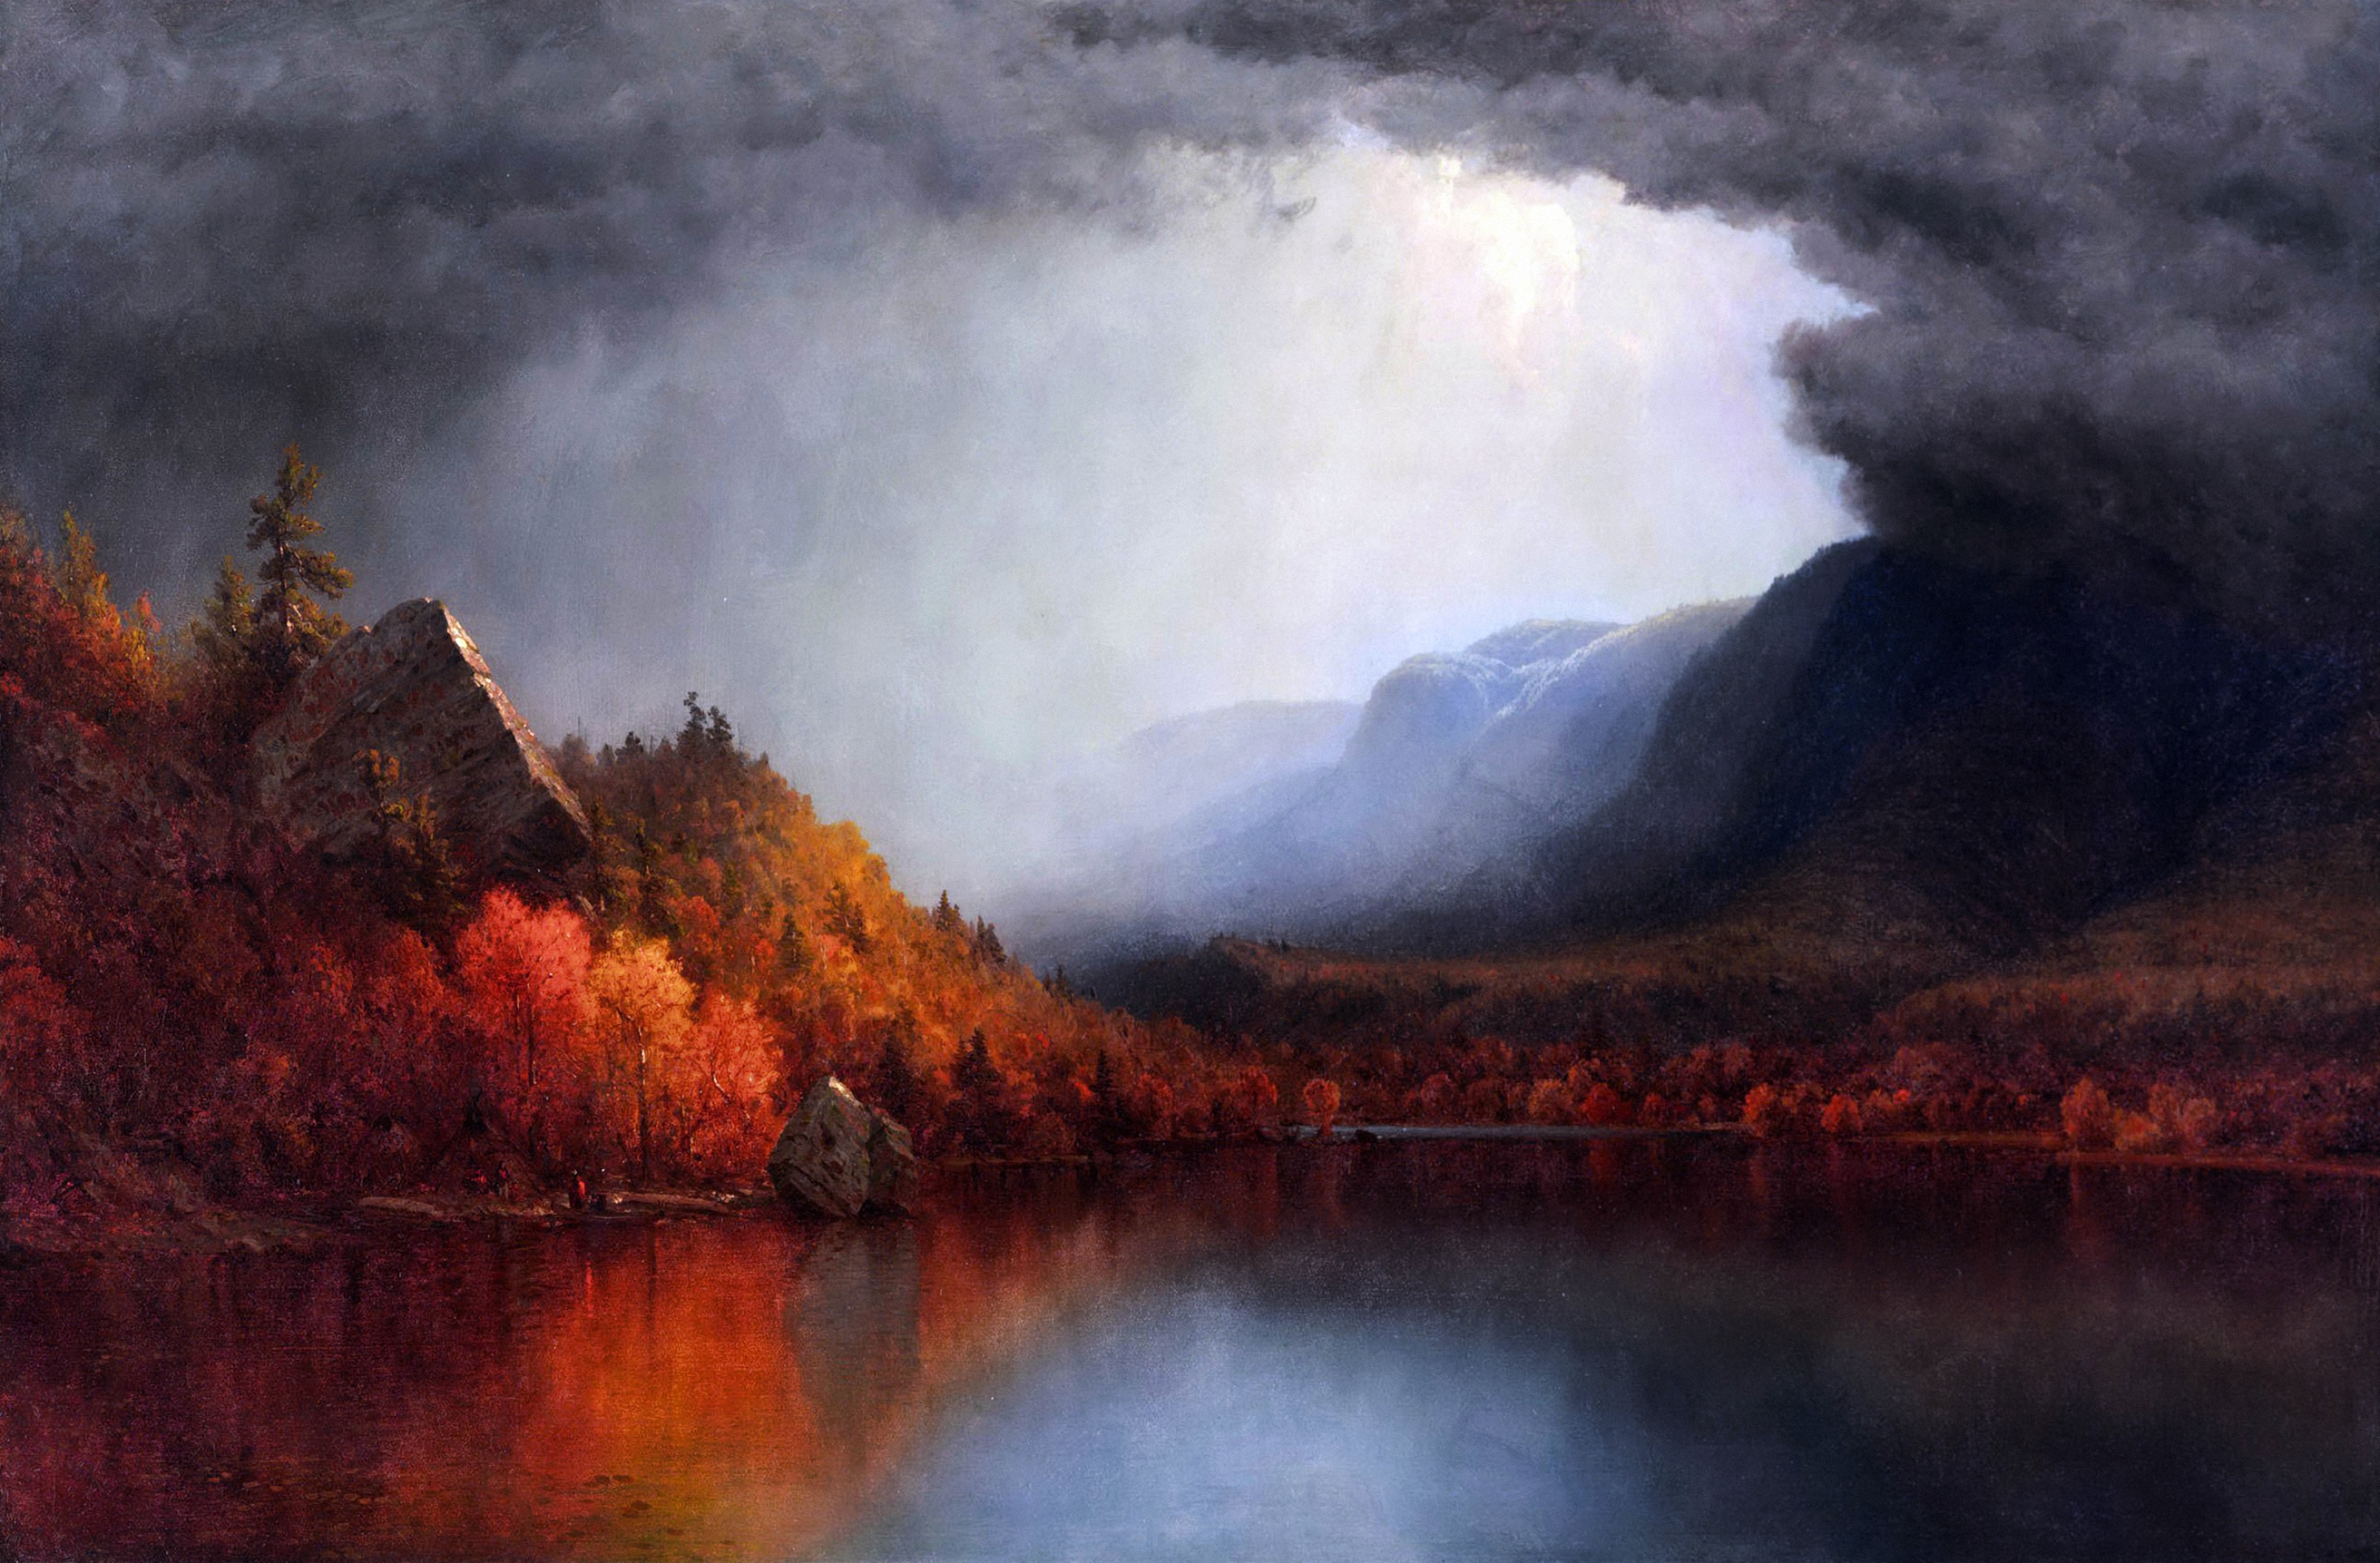 Landscape Mountains Trees Water Clouds Sky Storm Fall Painting Artwork 2623x1723